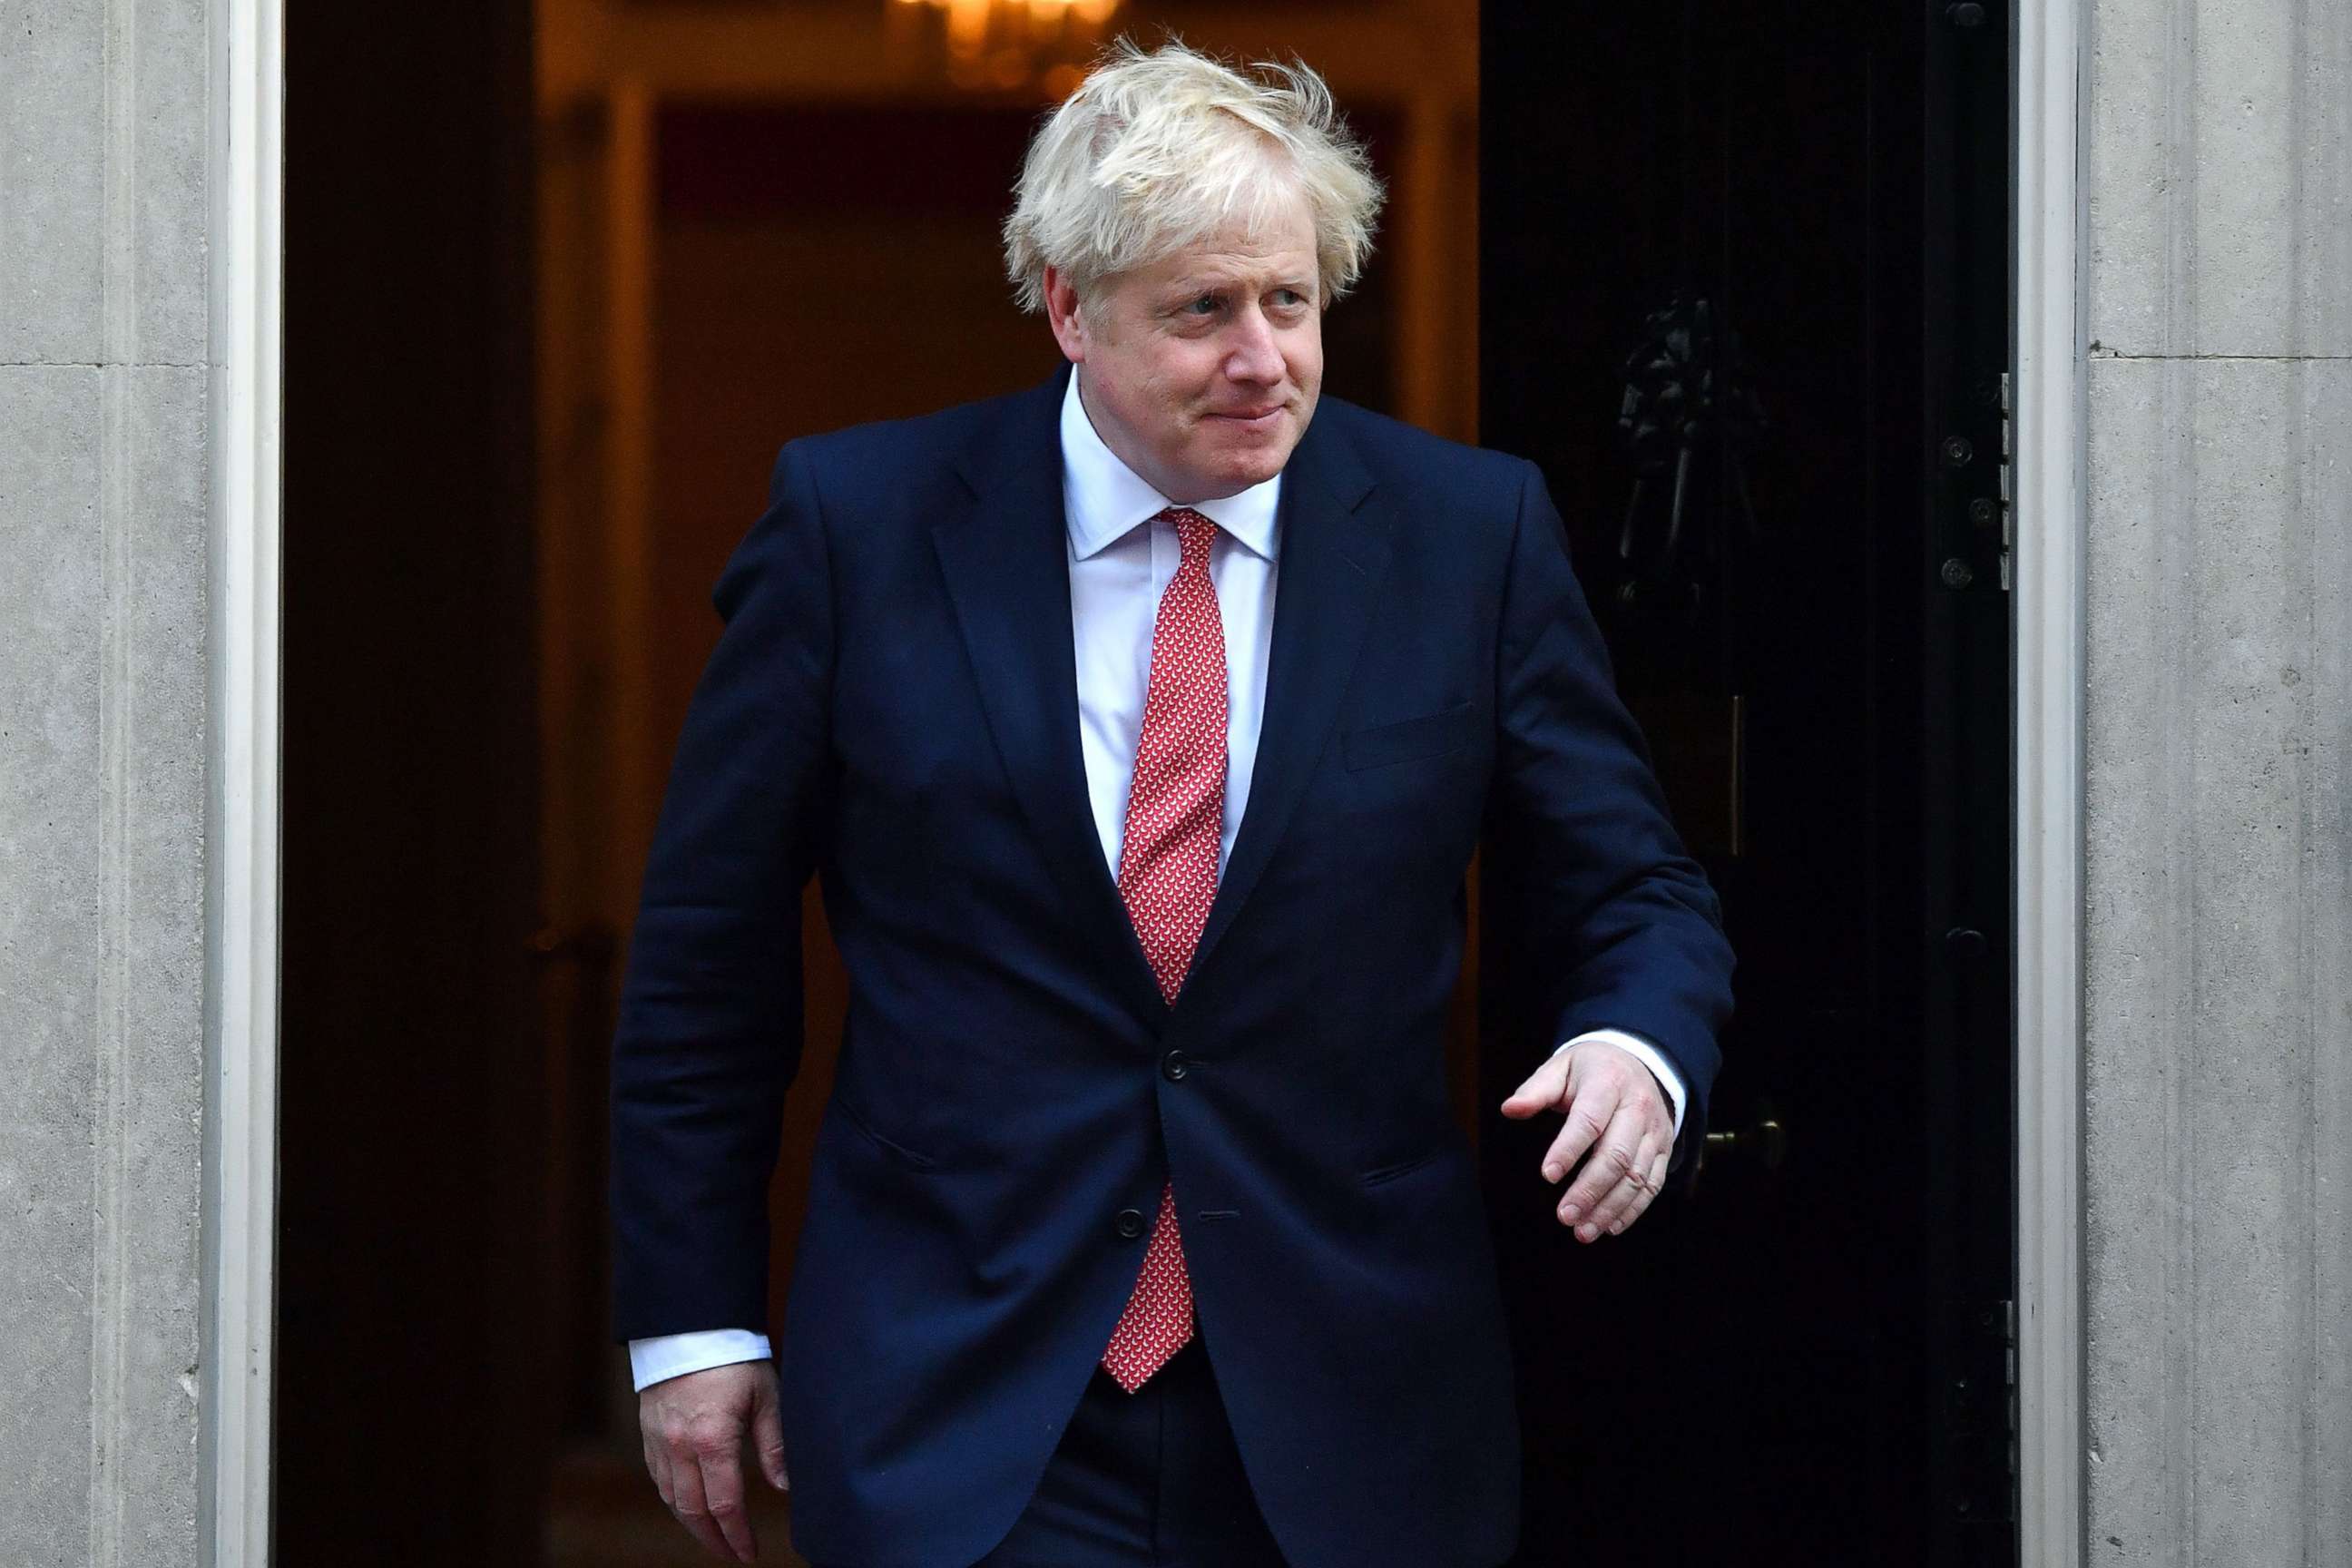 PHOTO: Britain's Prime Minister Boris Johnson walks out of 10 Downing street in central London on Sept. 20, 2019.